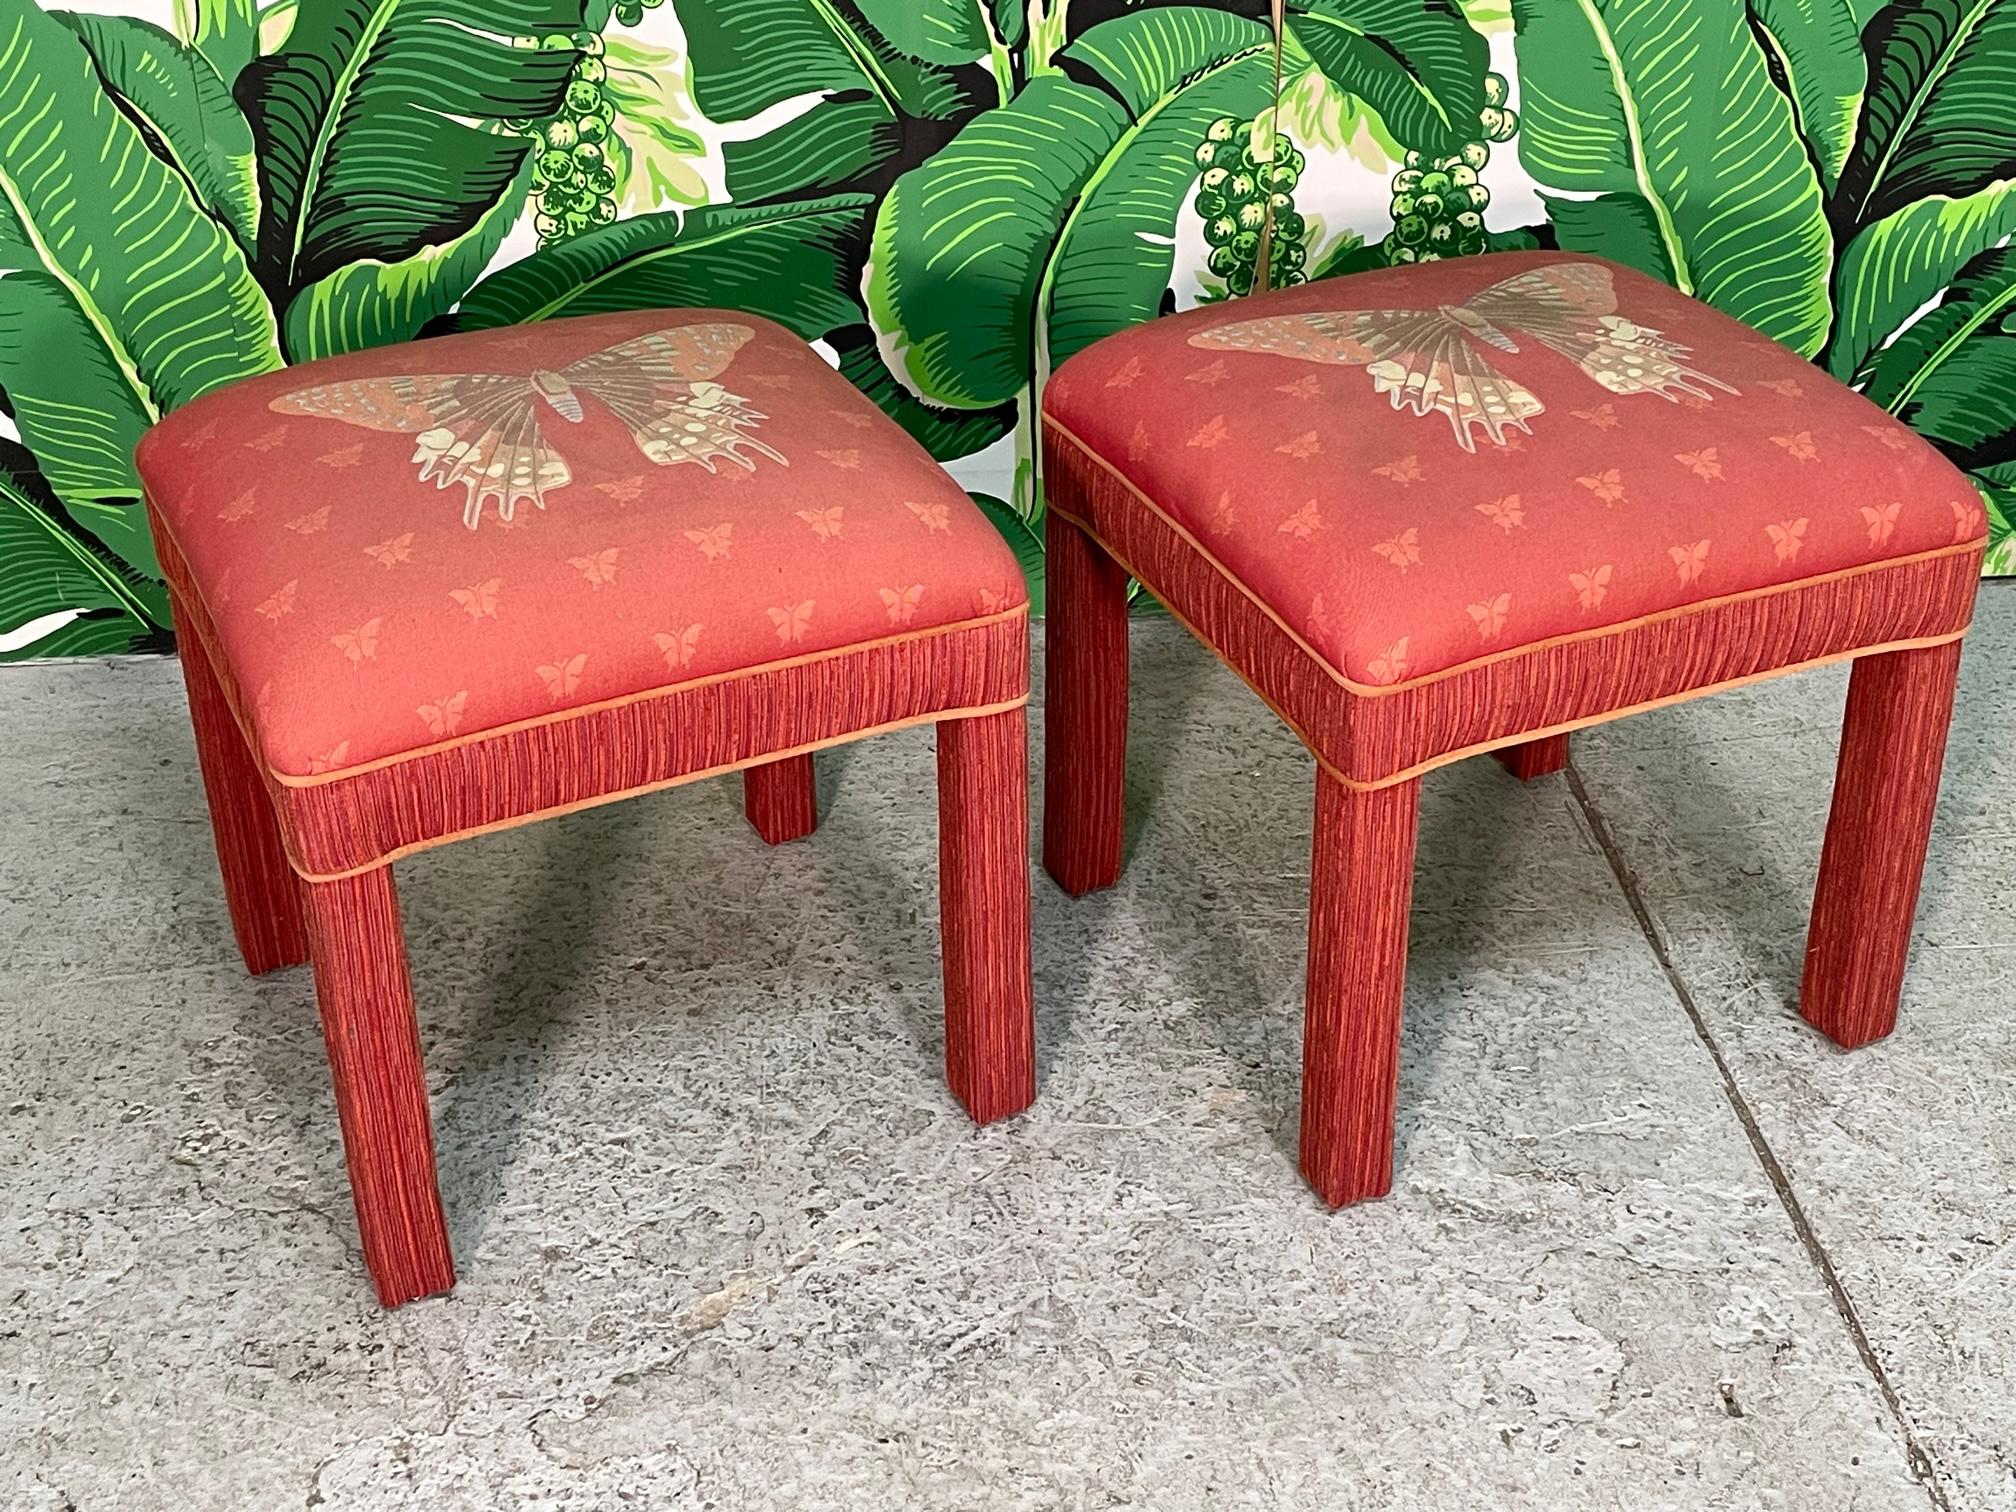 Pair of mid century fully upholstered foot stools embellished with a large embroidered butterfly. Could be used as ottomans. Good condition with imperfections consistent with age, some small pen marks on one rear corner (see photos). 
For a shipping